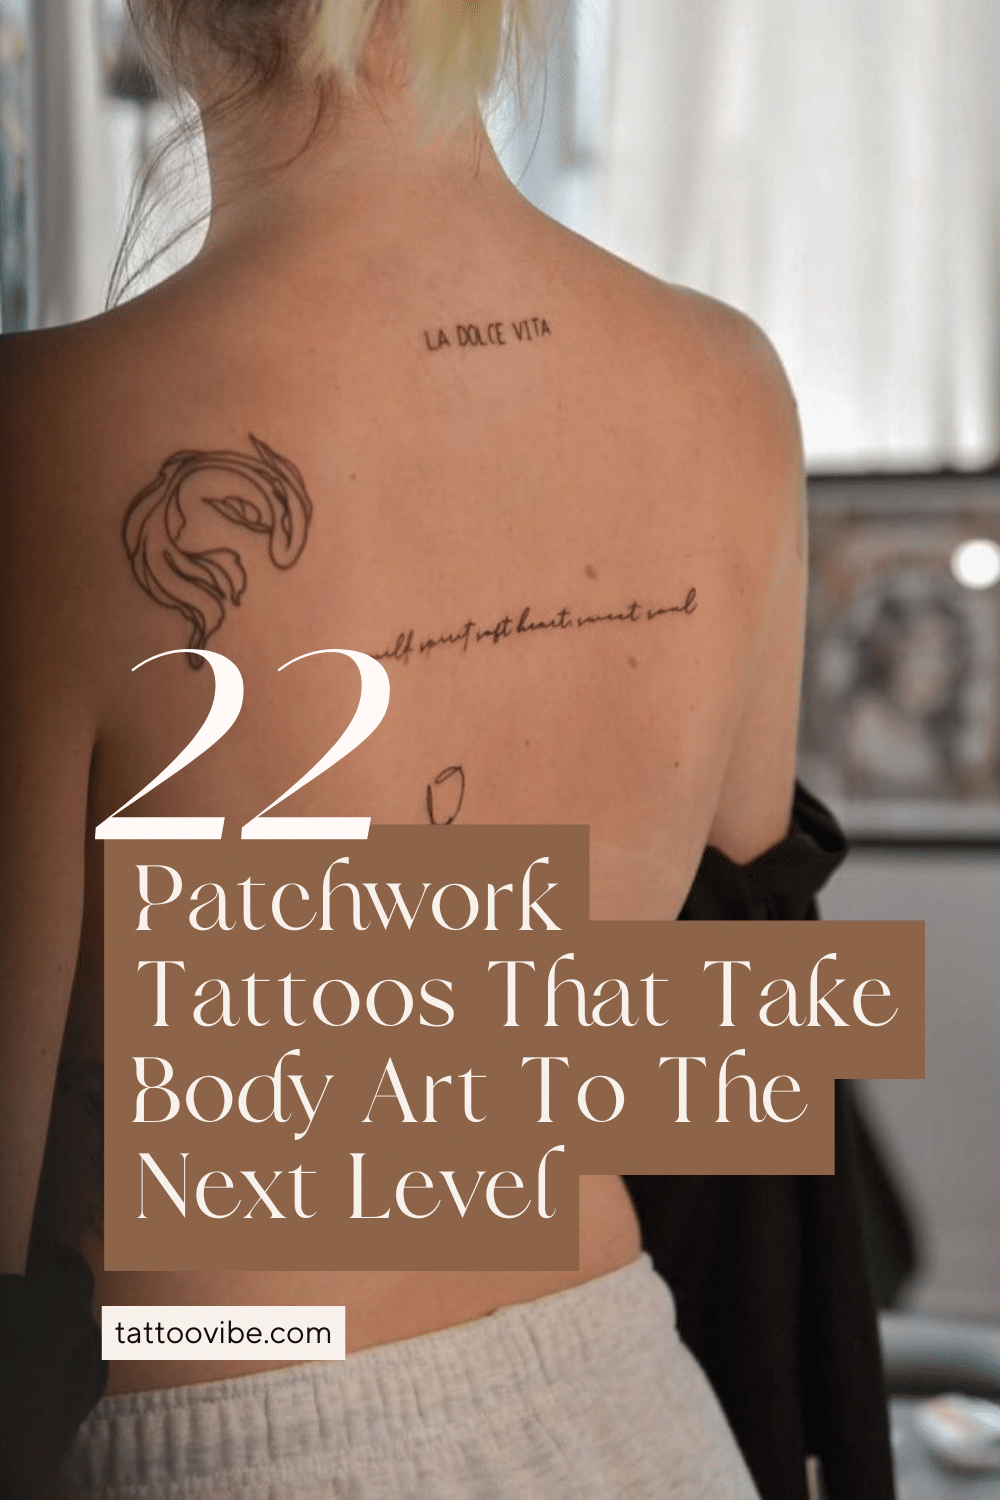 22 Patchwork Tattoos That Take Body Art To The Next Level